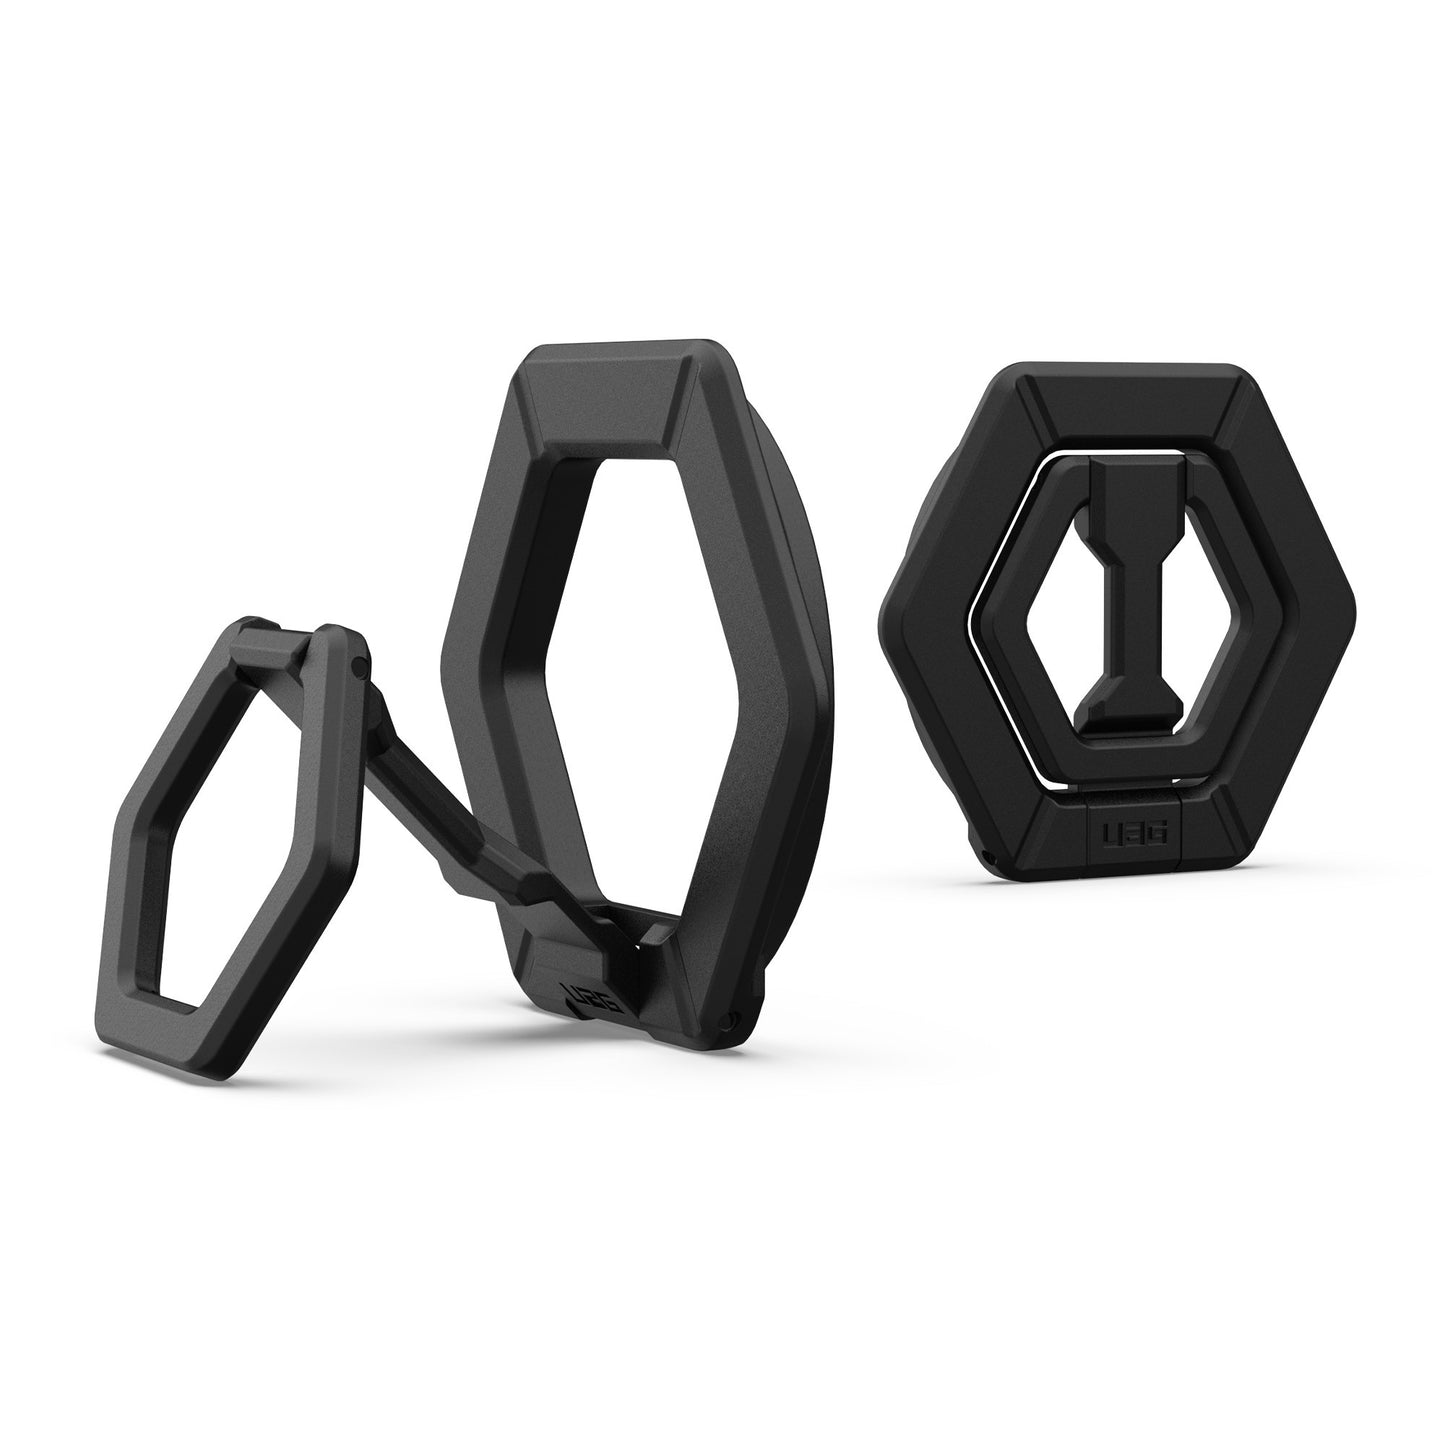 UAG Magnetic Ring Stand - Black - 15-12712